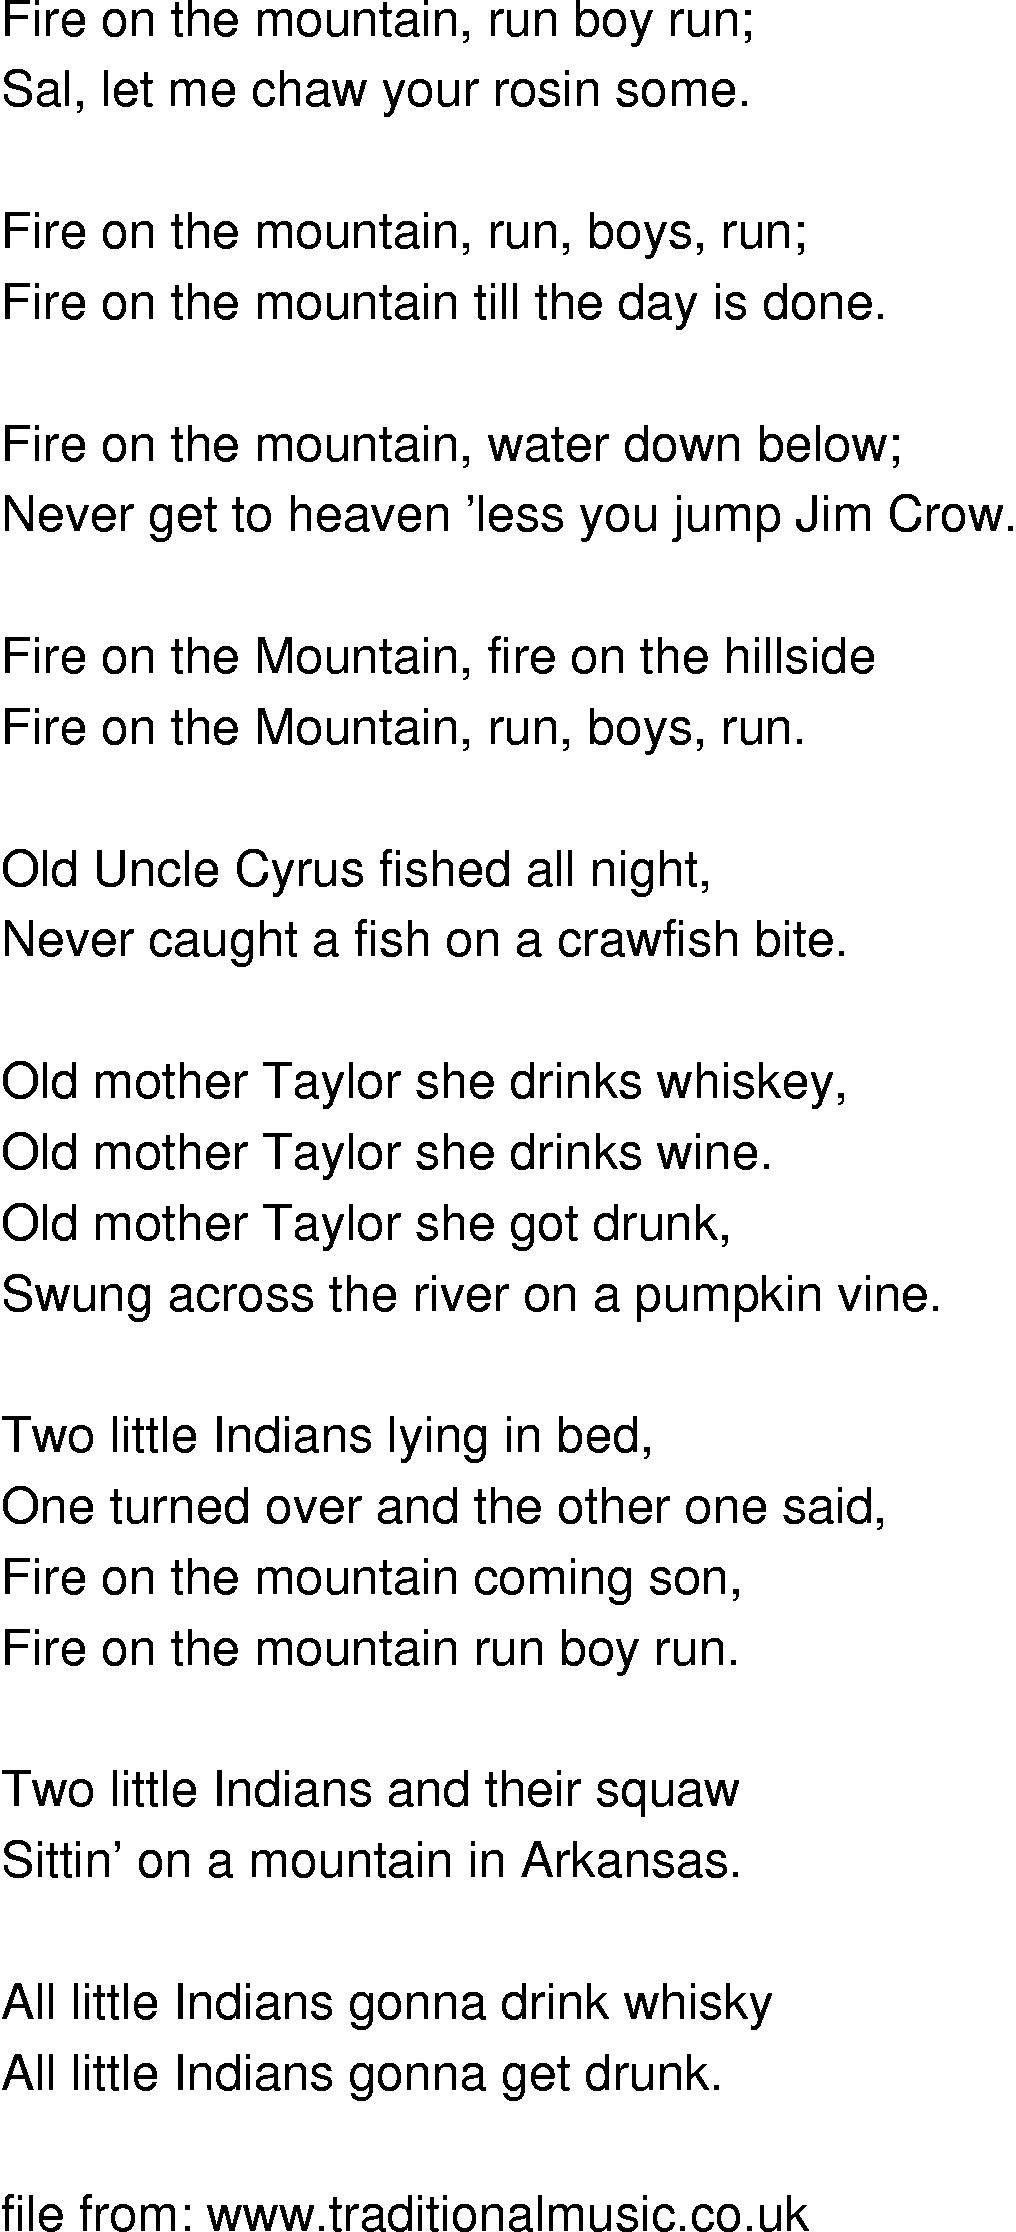 Old-Time (oldtimey) Song Lyrics - fire on the mountain